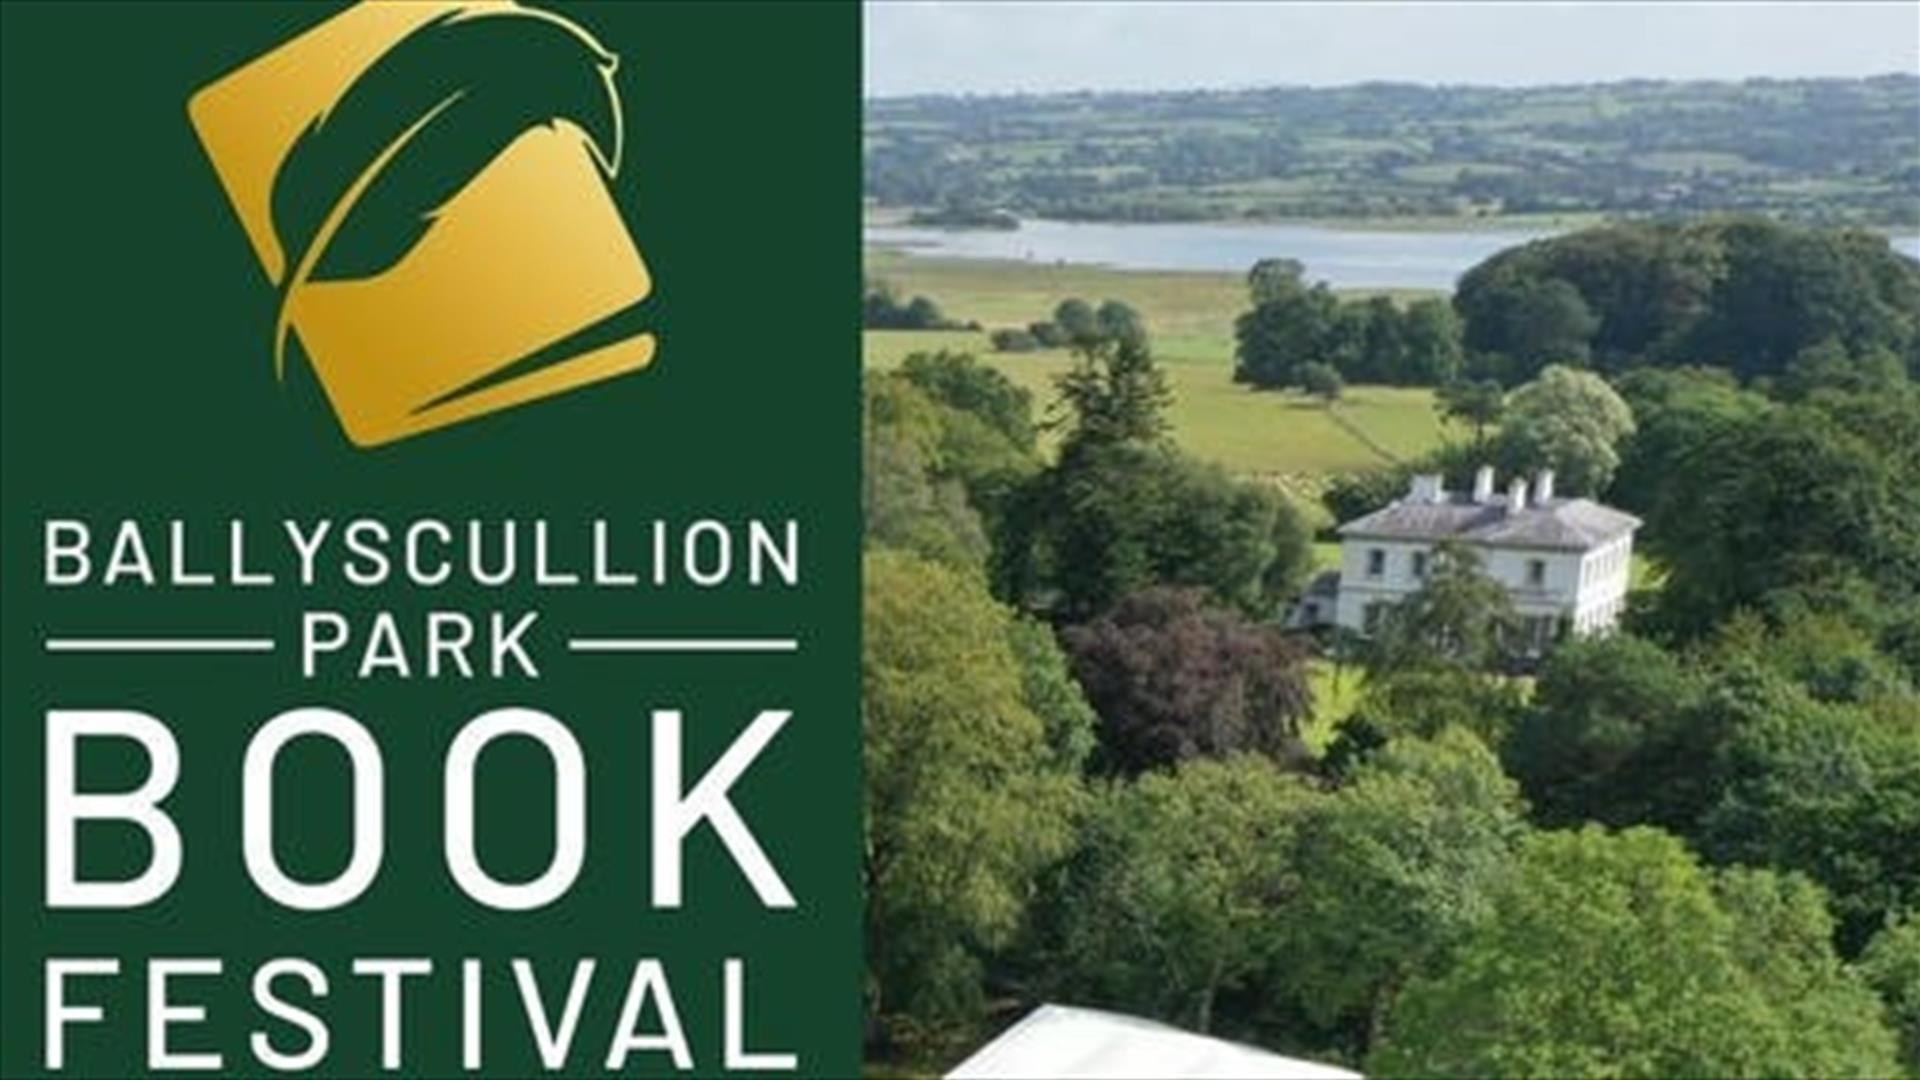 Drone image of Ballyscullion house with Ballyscullion Park Book Festival written on a green background